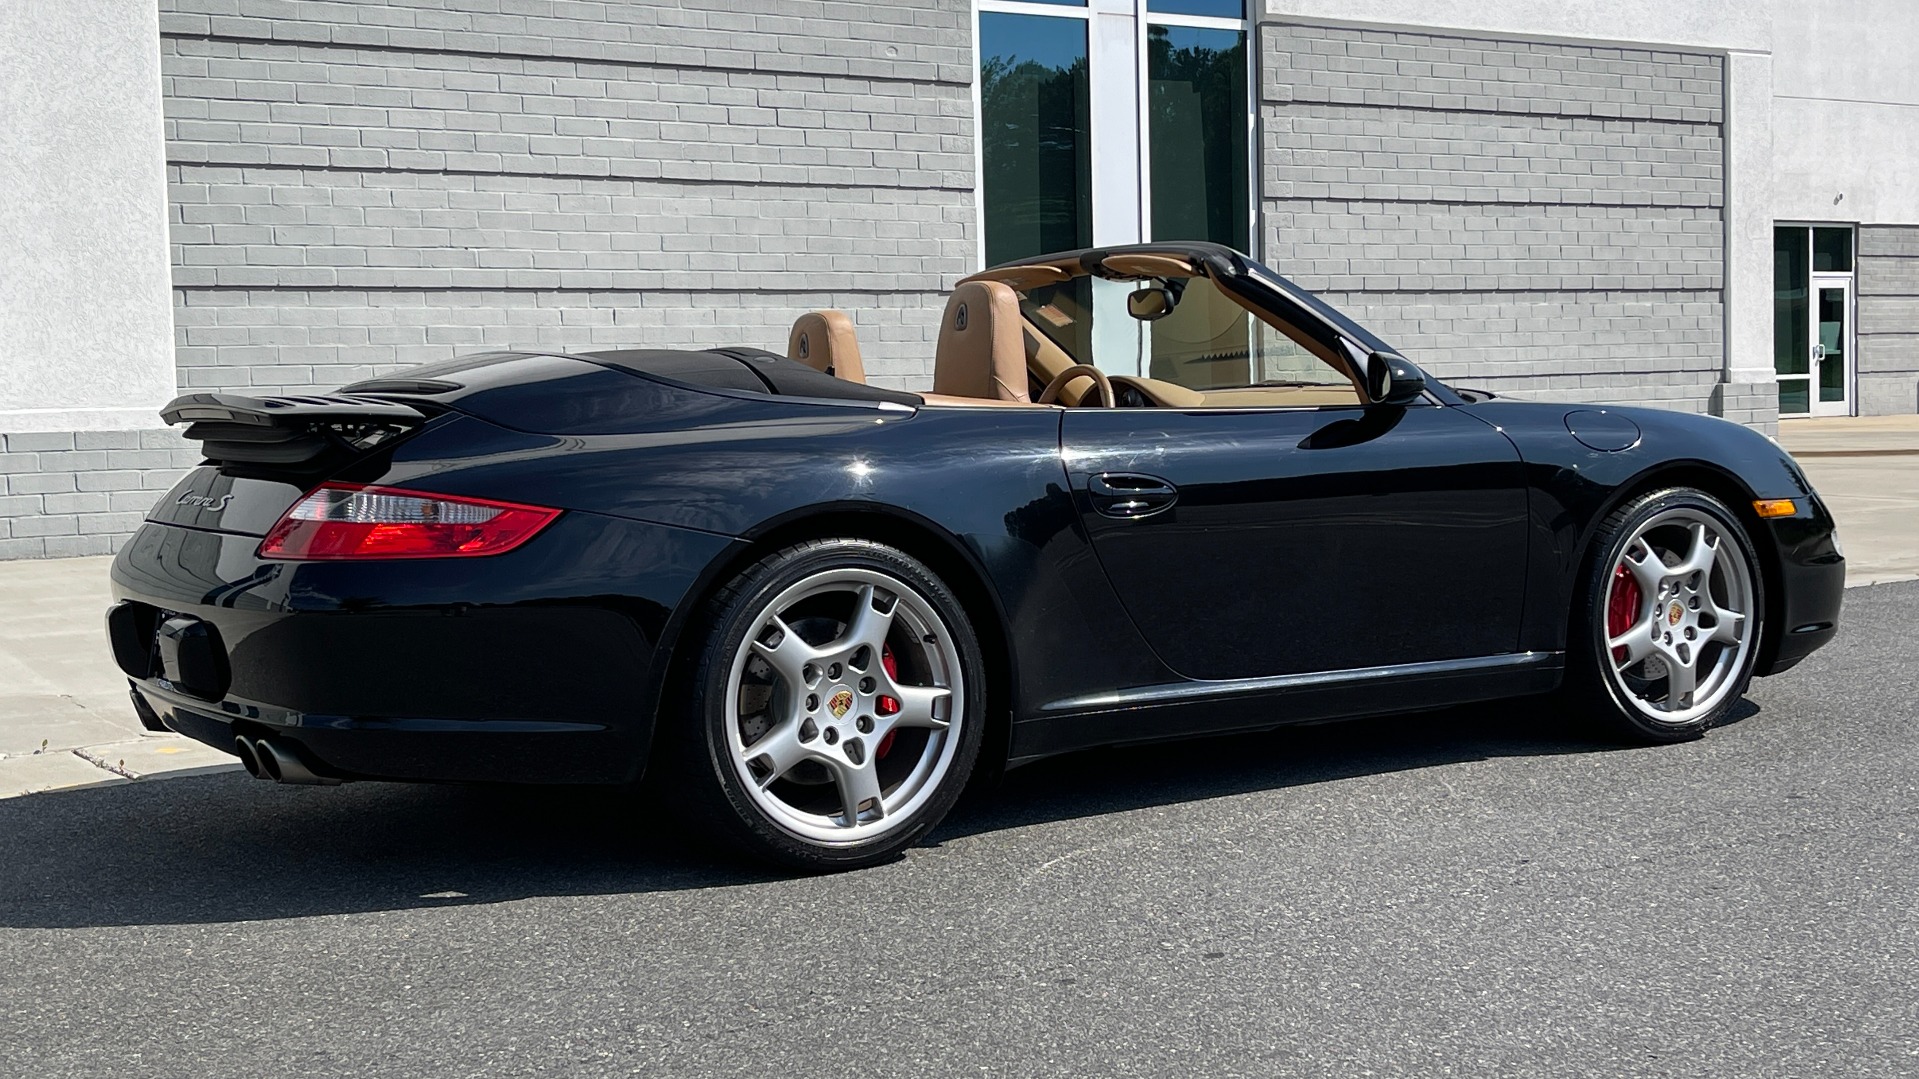 Used 2006 Porsche 911 CARRERA S CABRIOLET / BOSE / CD CHANGER / PWR SEAT PKG / HTD STS for sale $60,999 at Formula Imports in Charlotte NC 28227 4